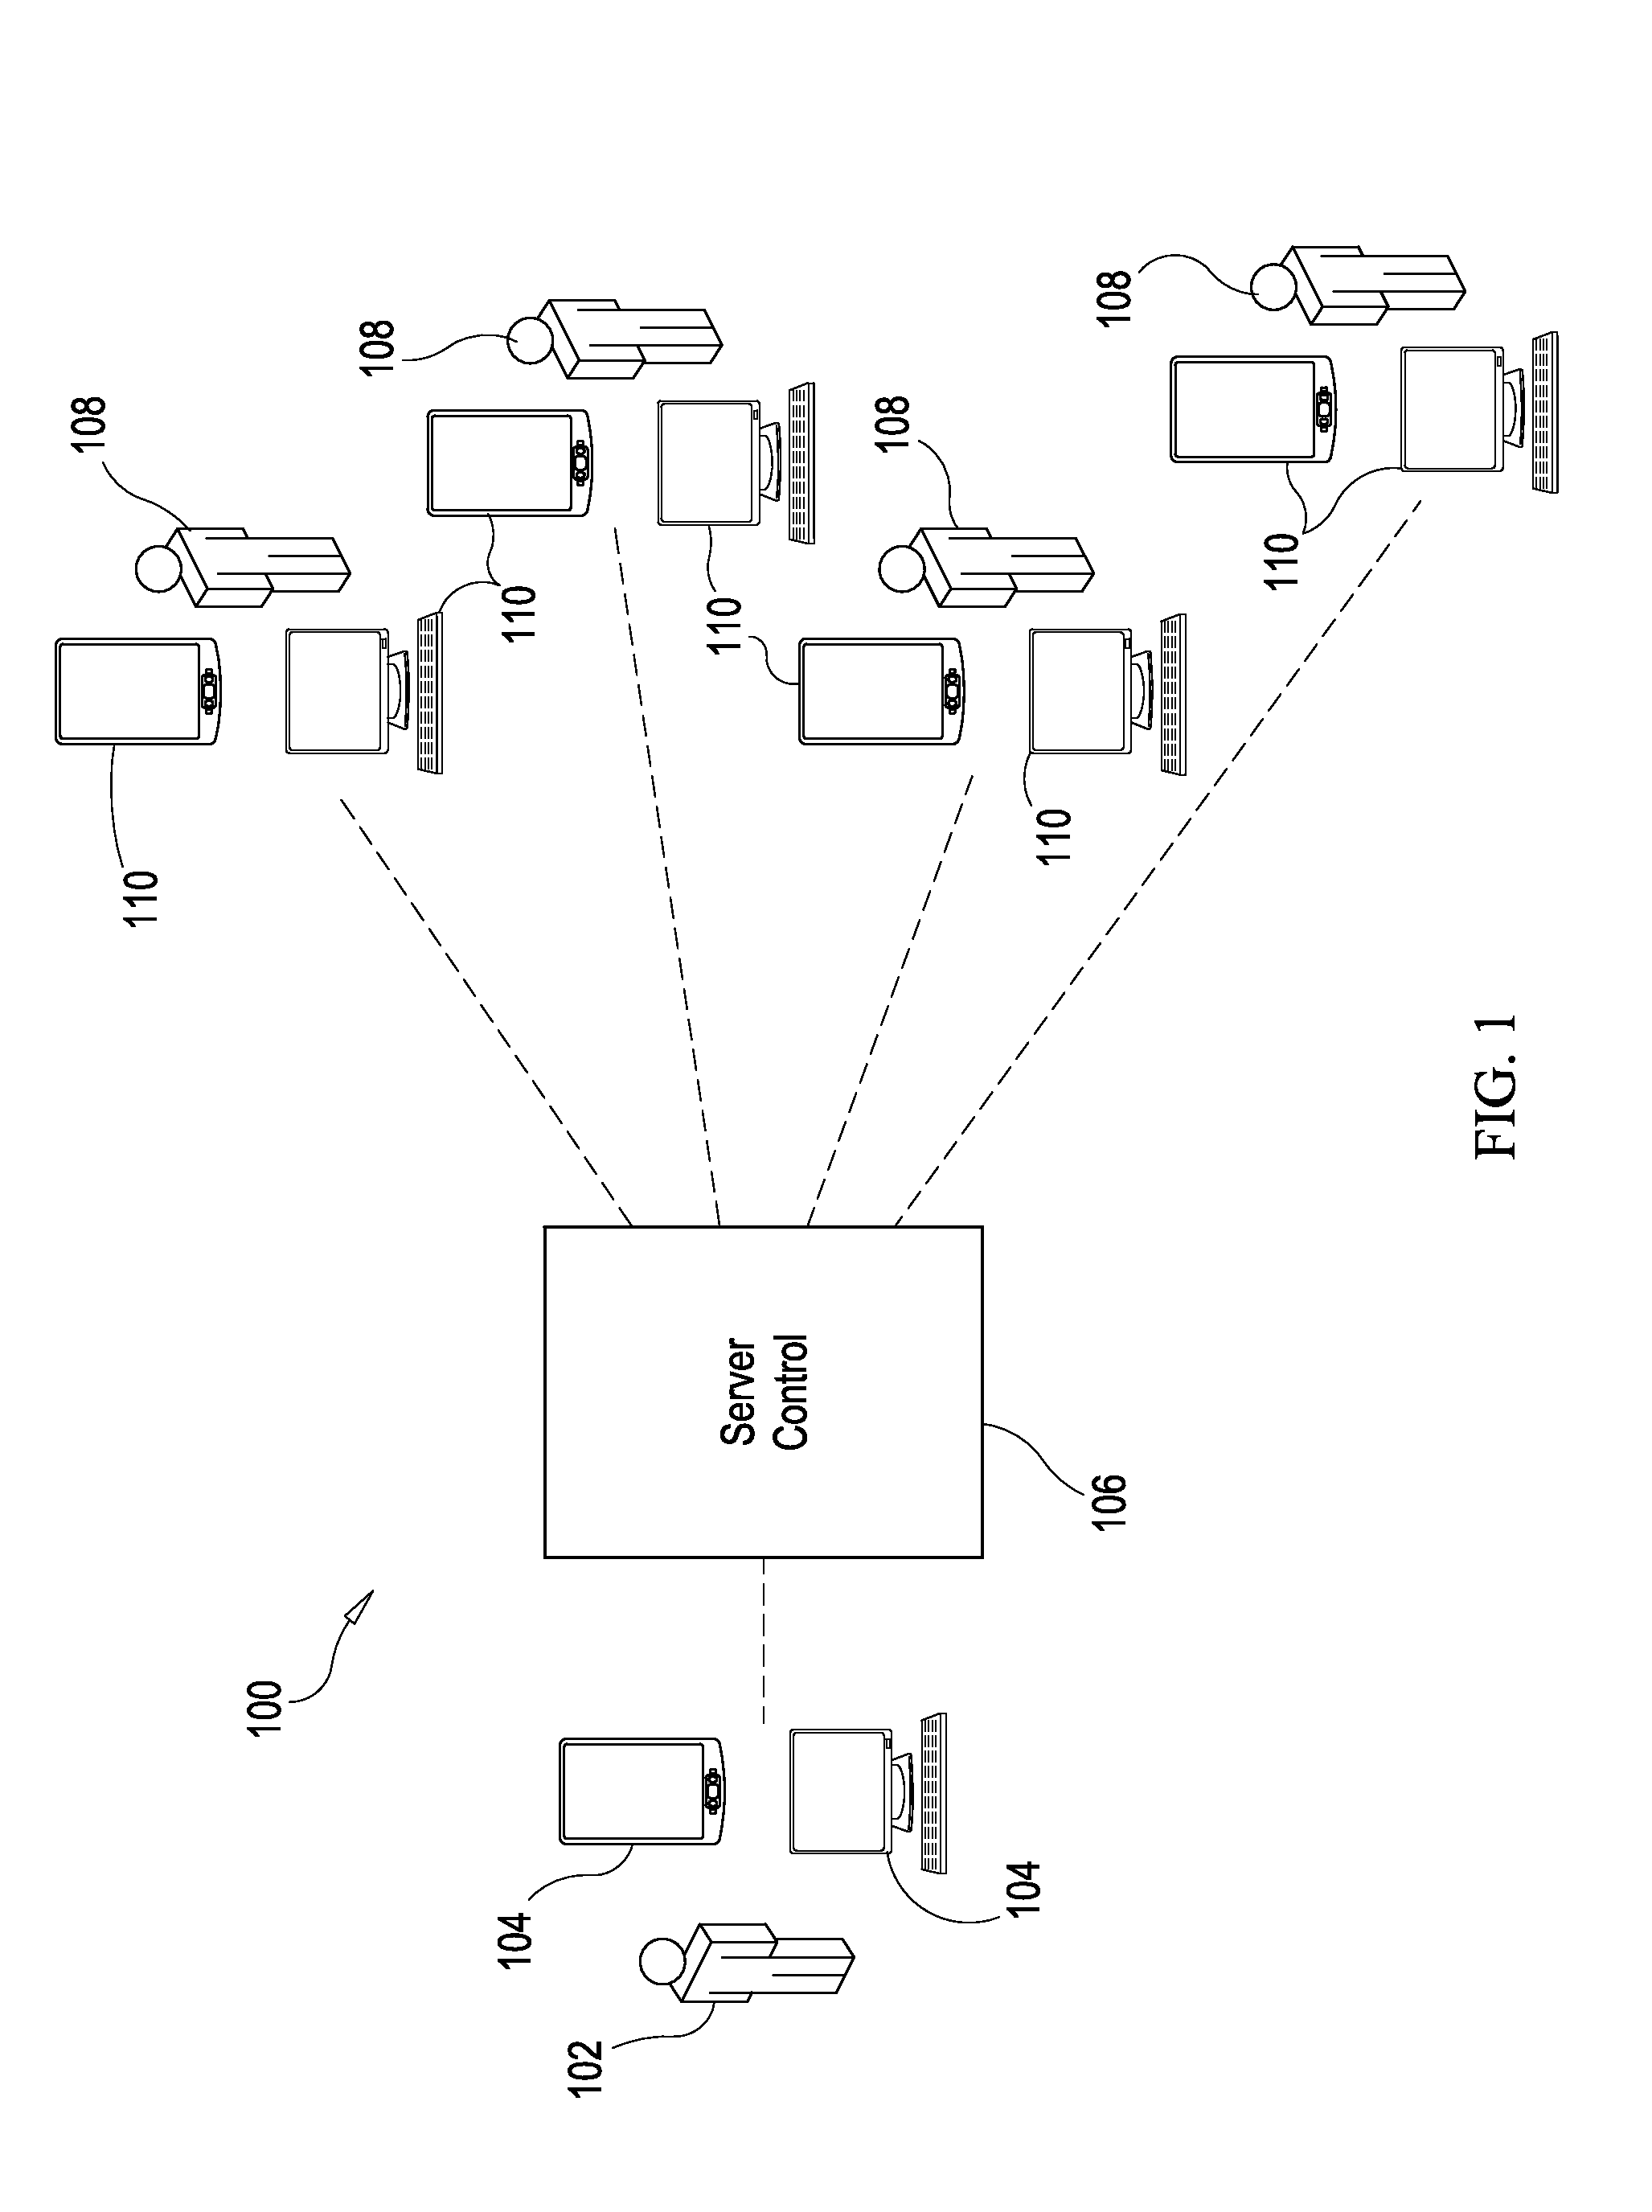 Methods & systems for using visible media in determining a physical location